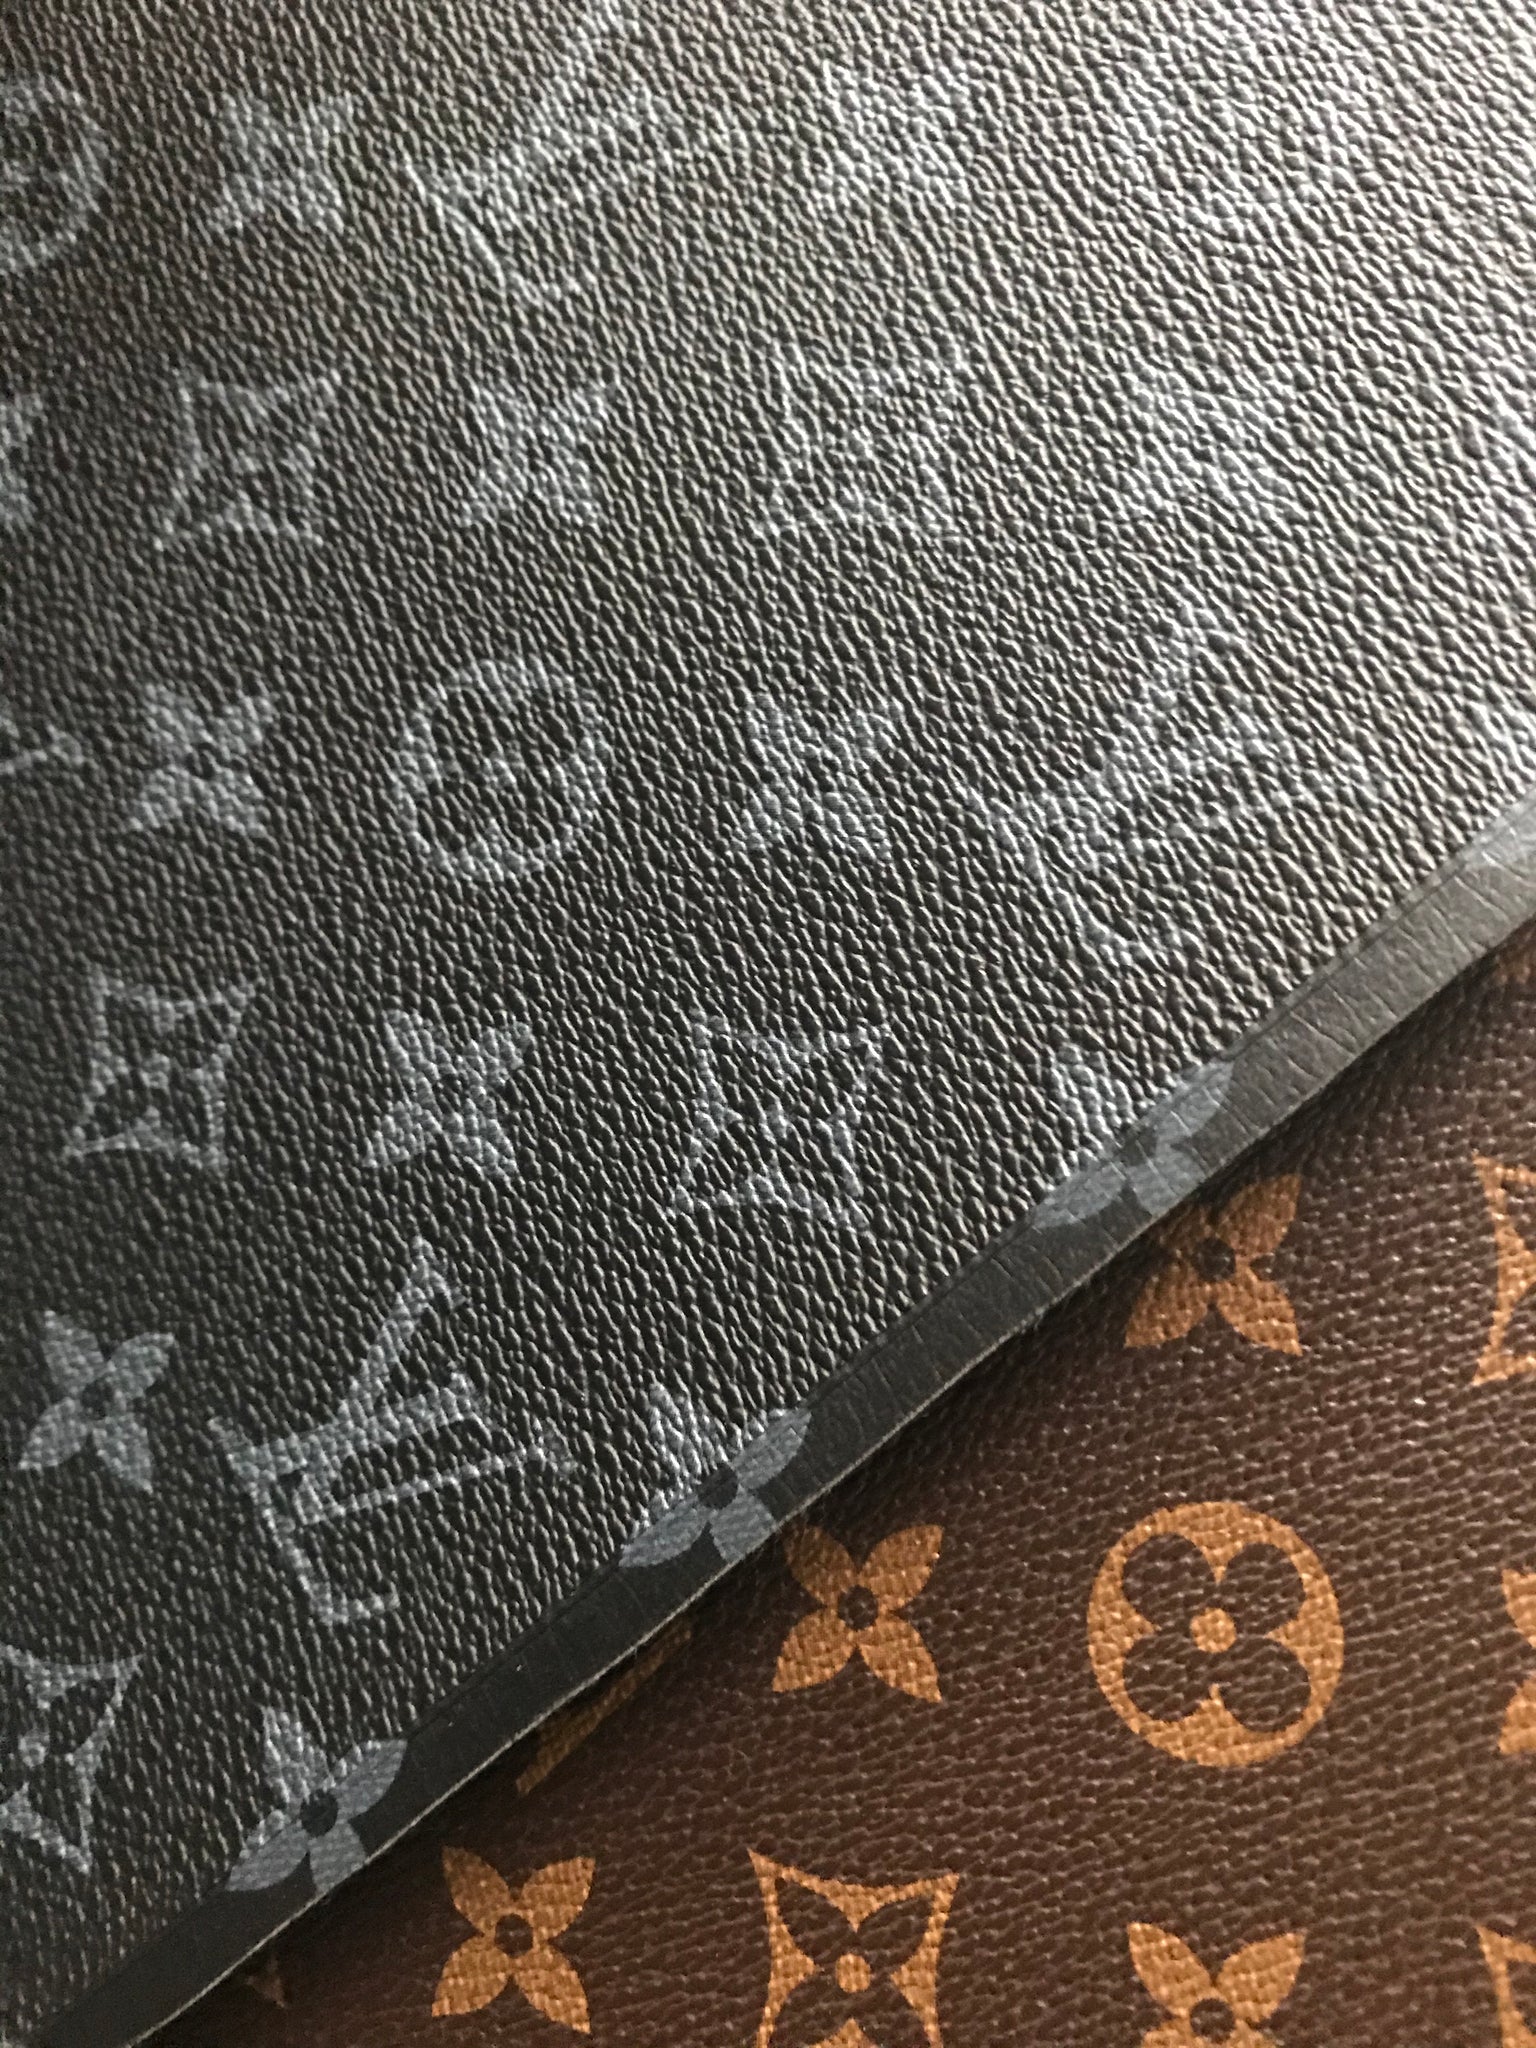 LV Shoes/Bags Vinyl Leather & Fabrics XHXC0523 Furniture and Home